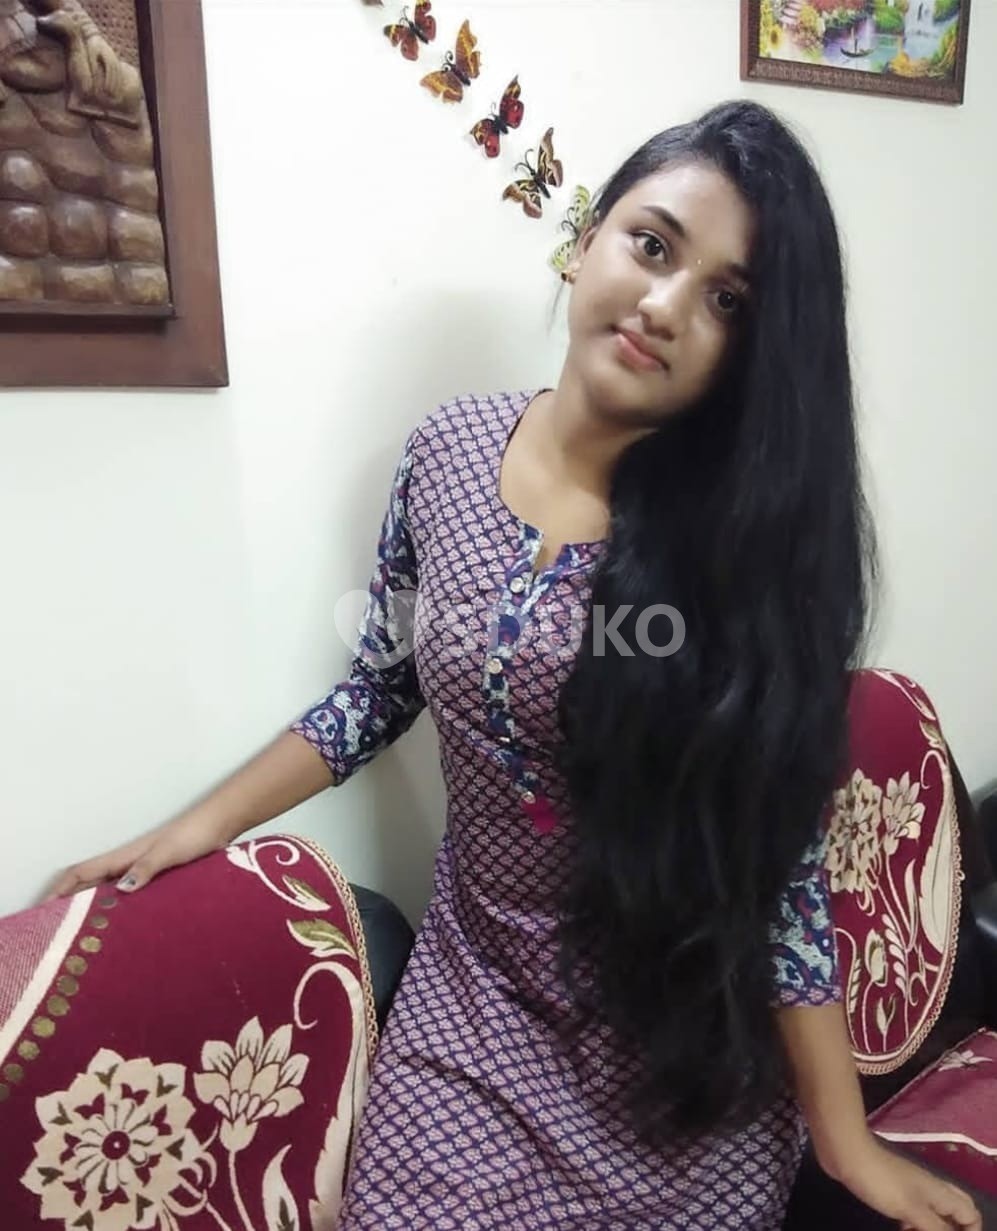 Chennai gys afortable price outcall incall available independent  call me